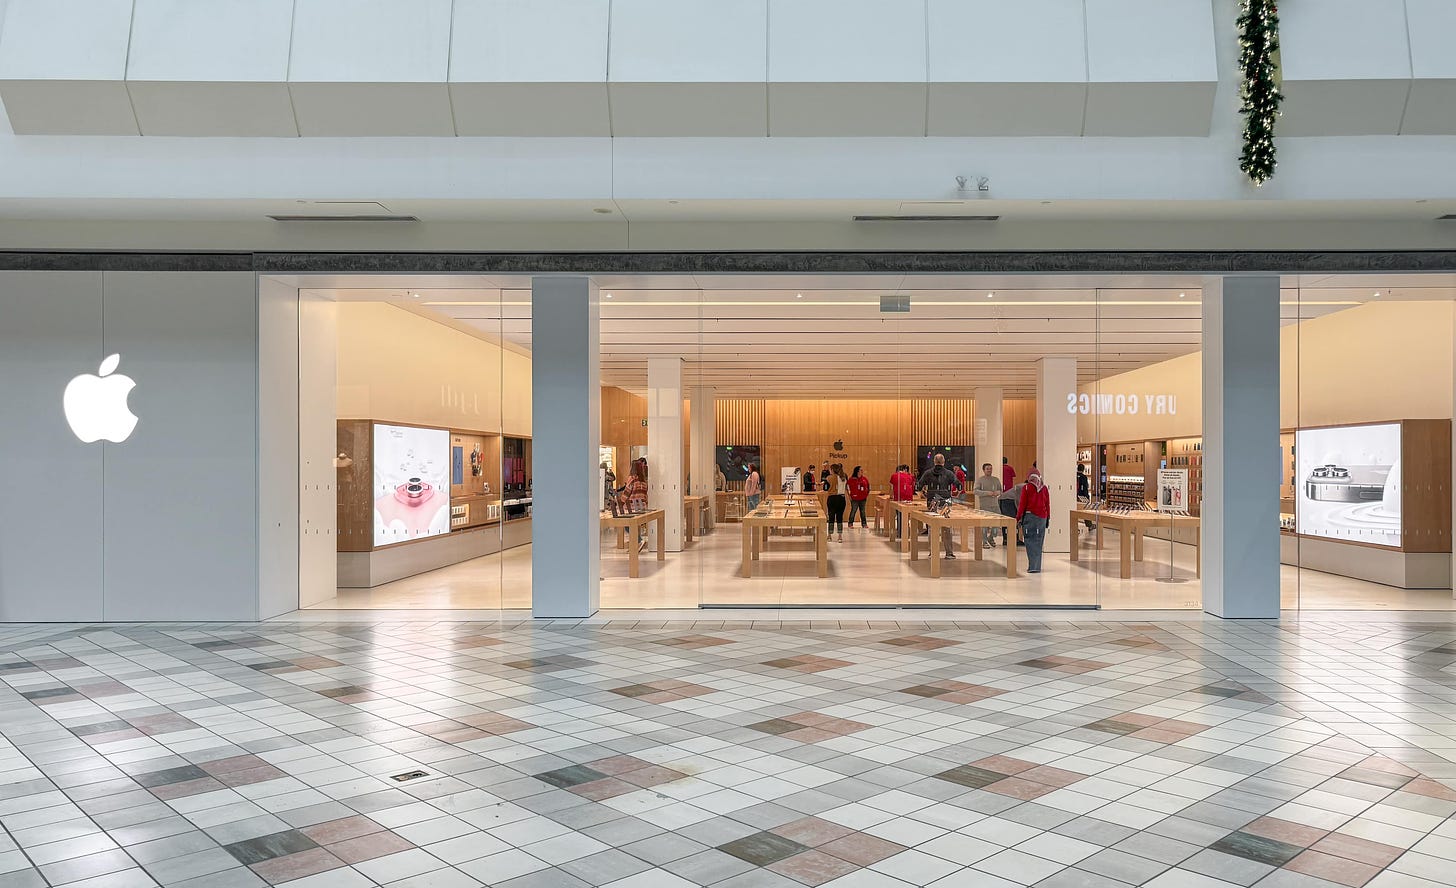 The exterior of Apple South Shore. The store is pictured preparing to open and staff are moving around inside. The mall hallway is brightly lit and empty.